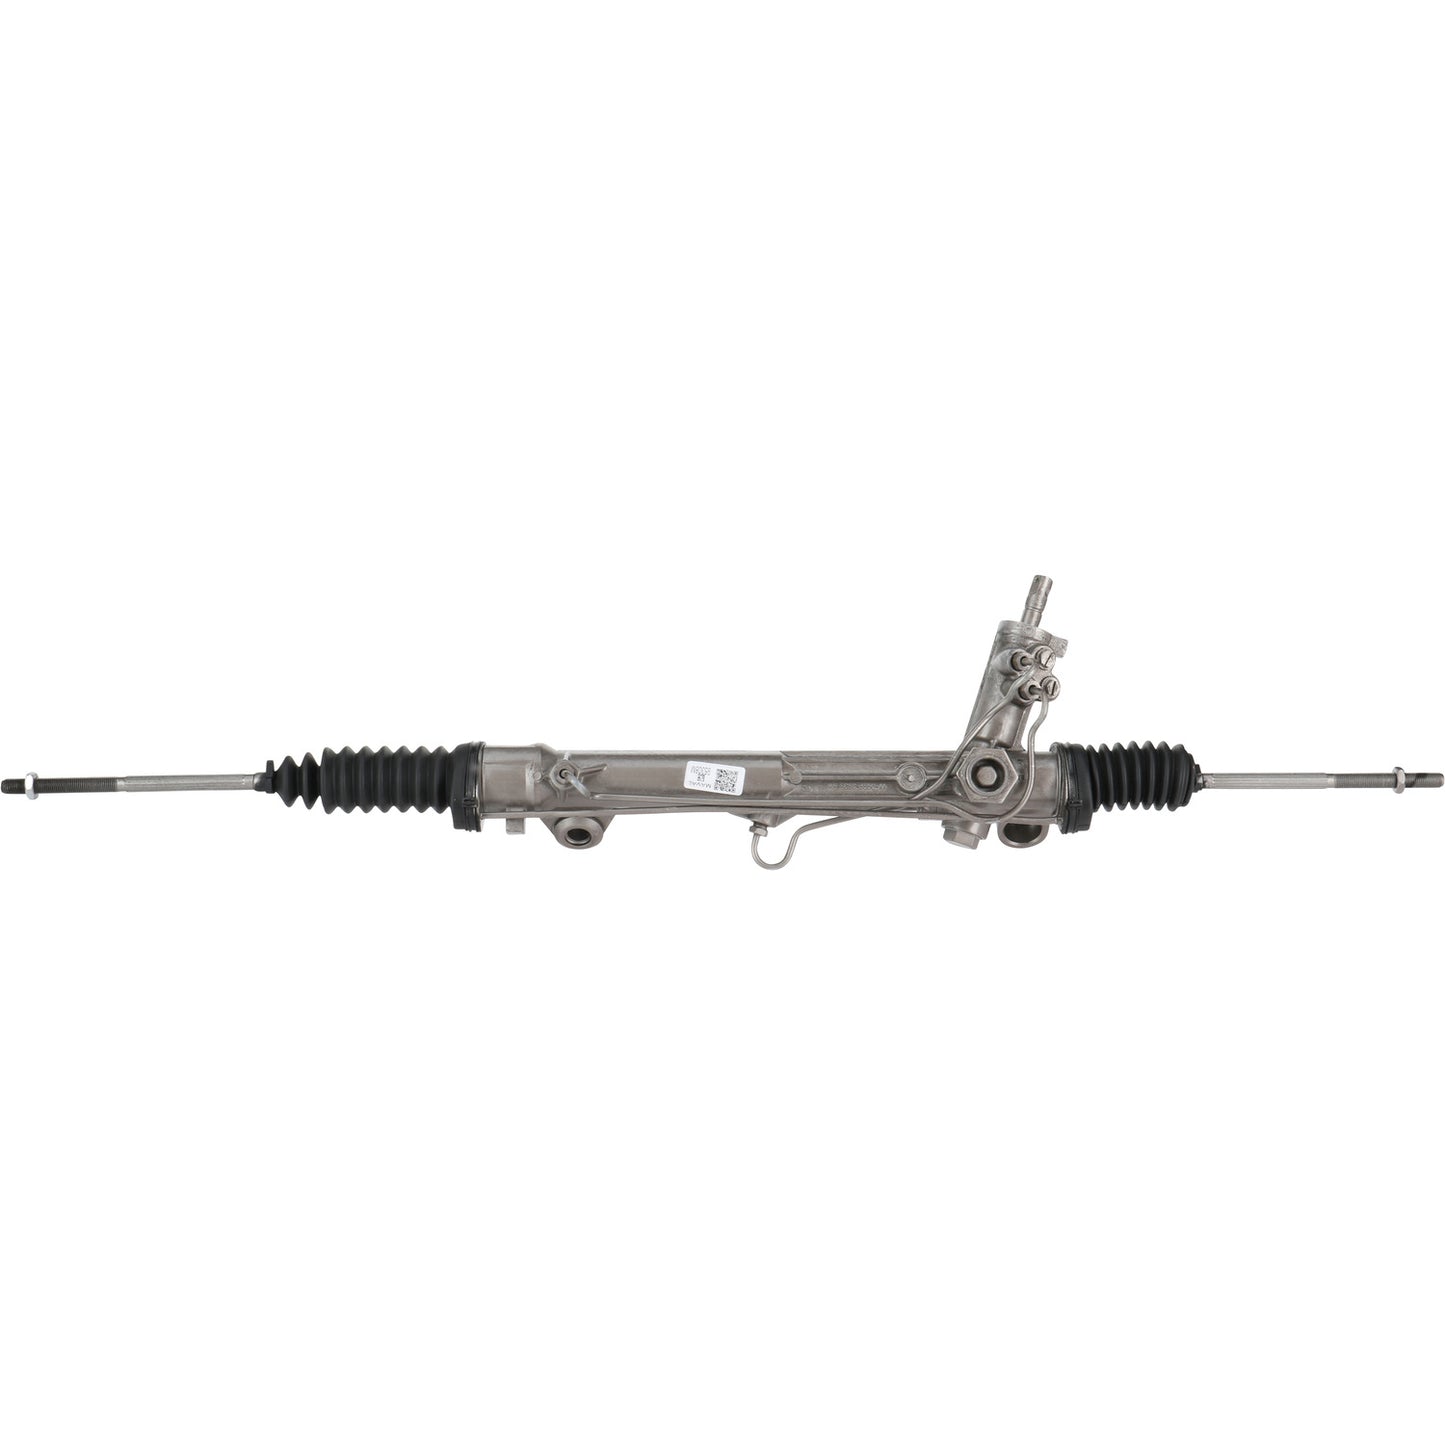 Rack and Pinion Assembly - MAVAL - Hydraulic Power - Remanufactured - 95308M